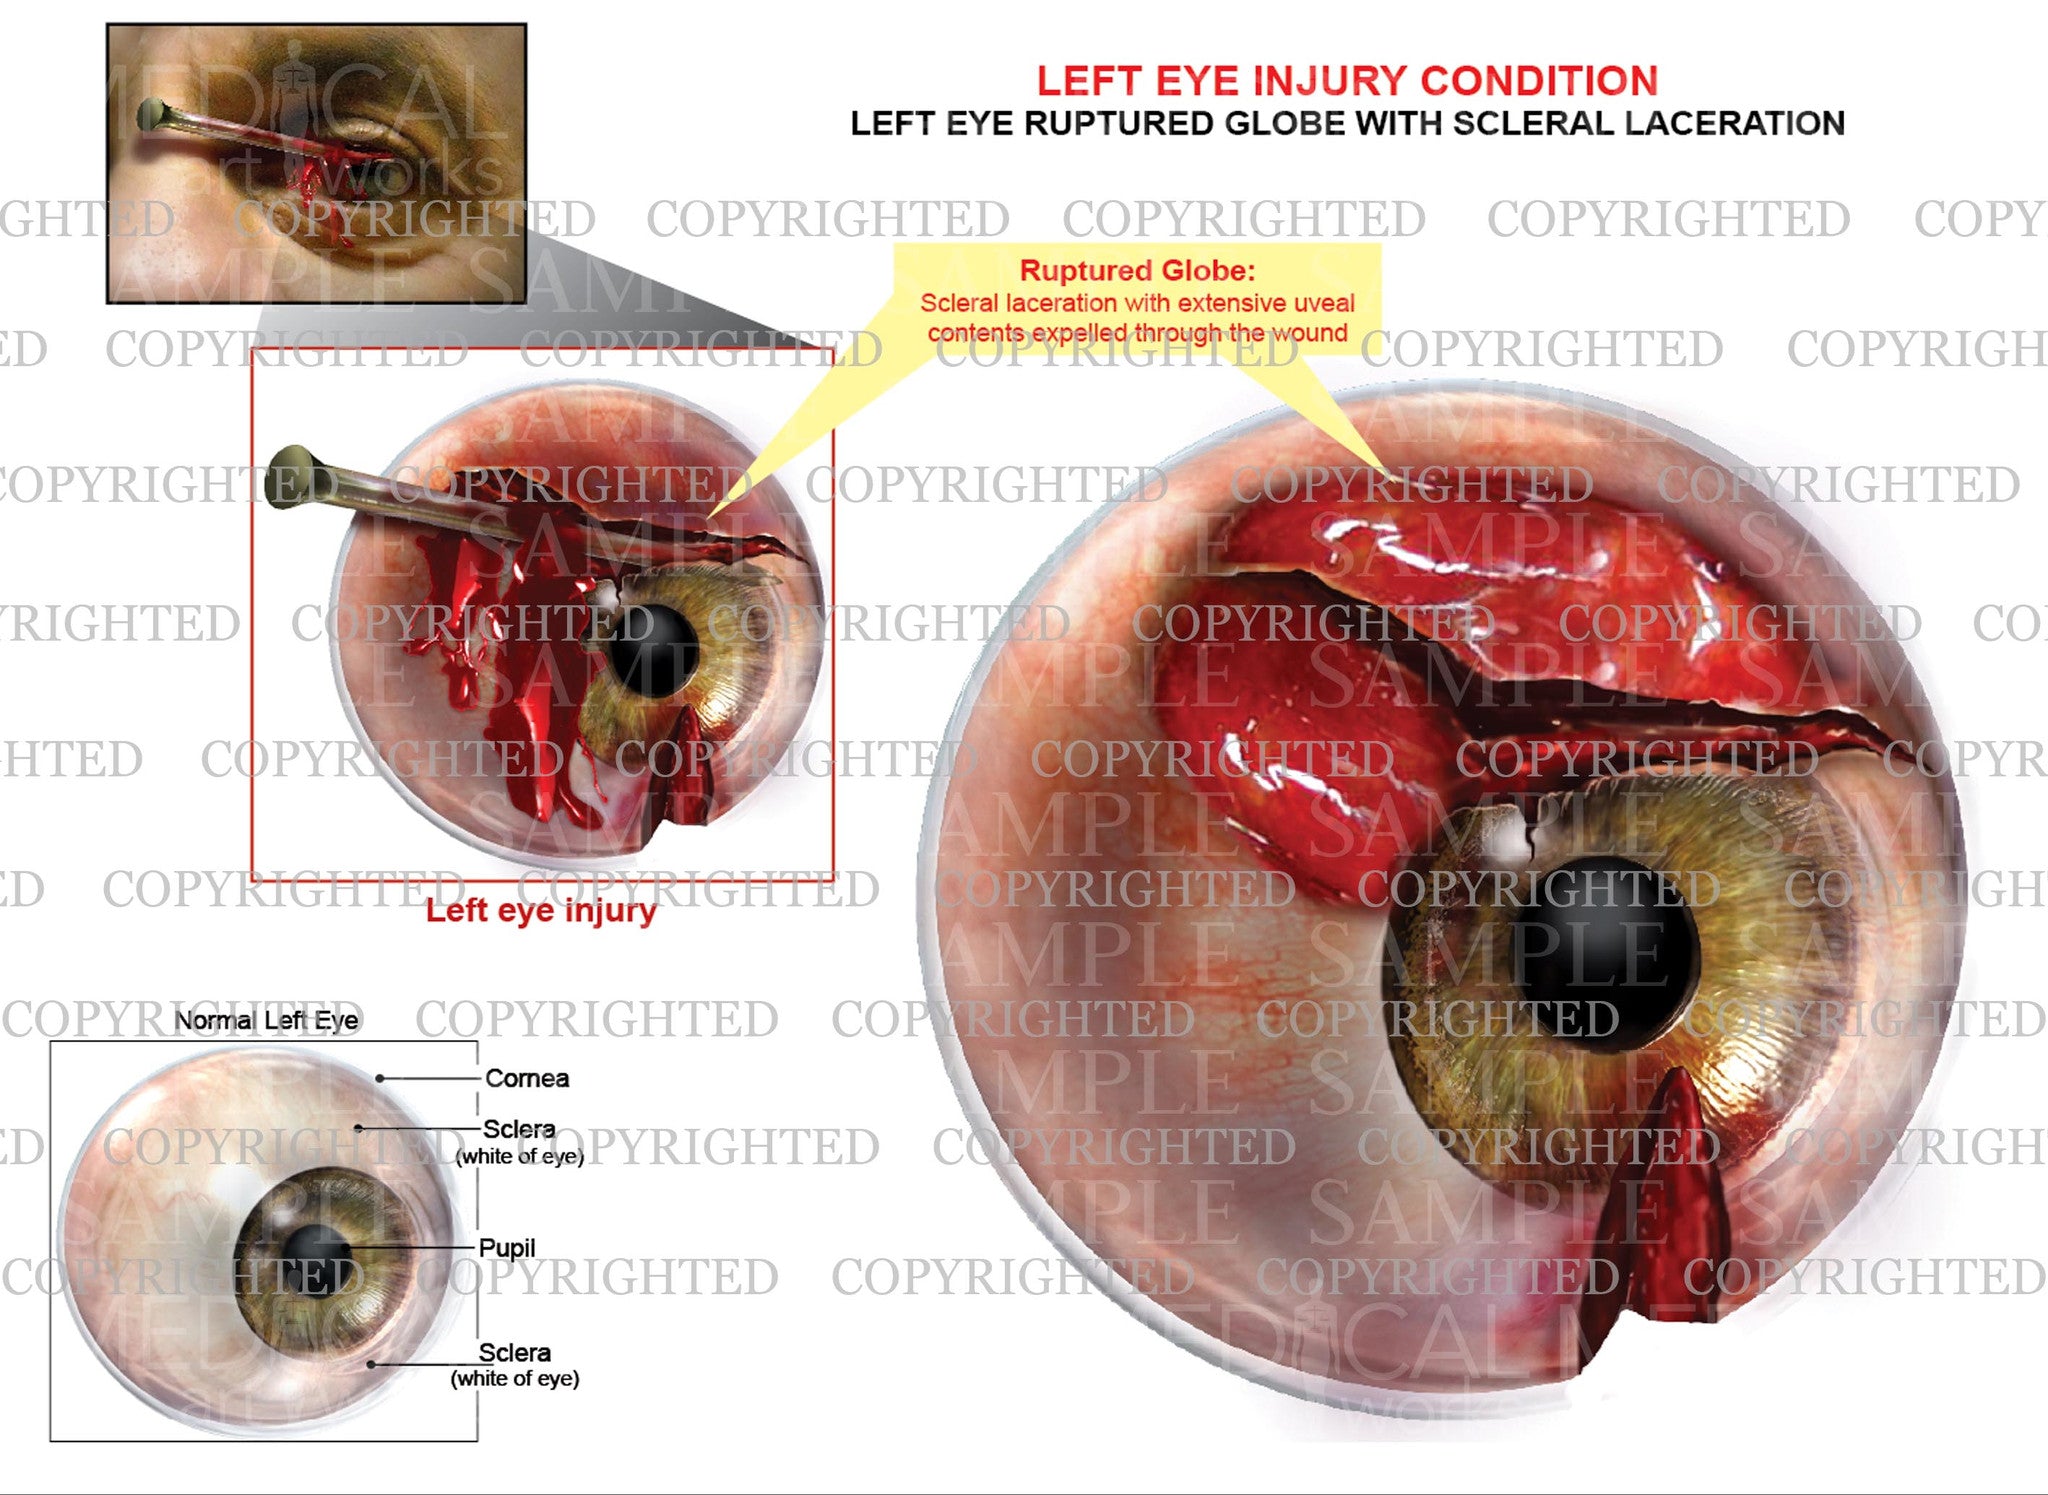 Common Eye Injuries | Eye Society - Eye Care Clinic in Chicago, IL